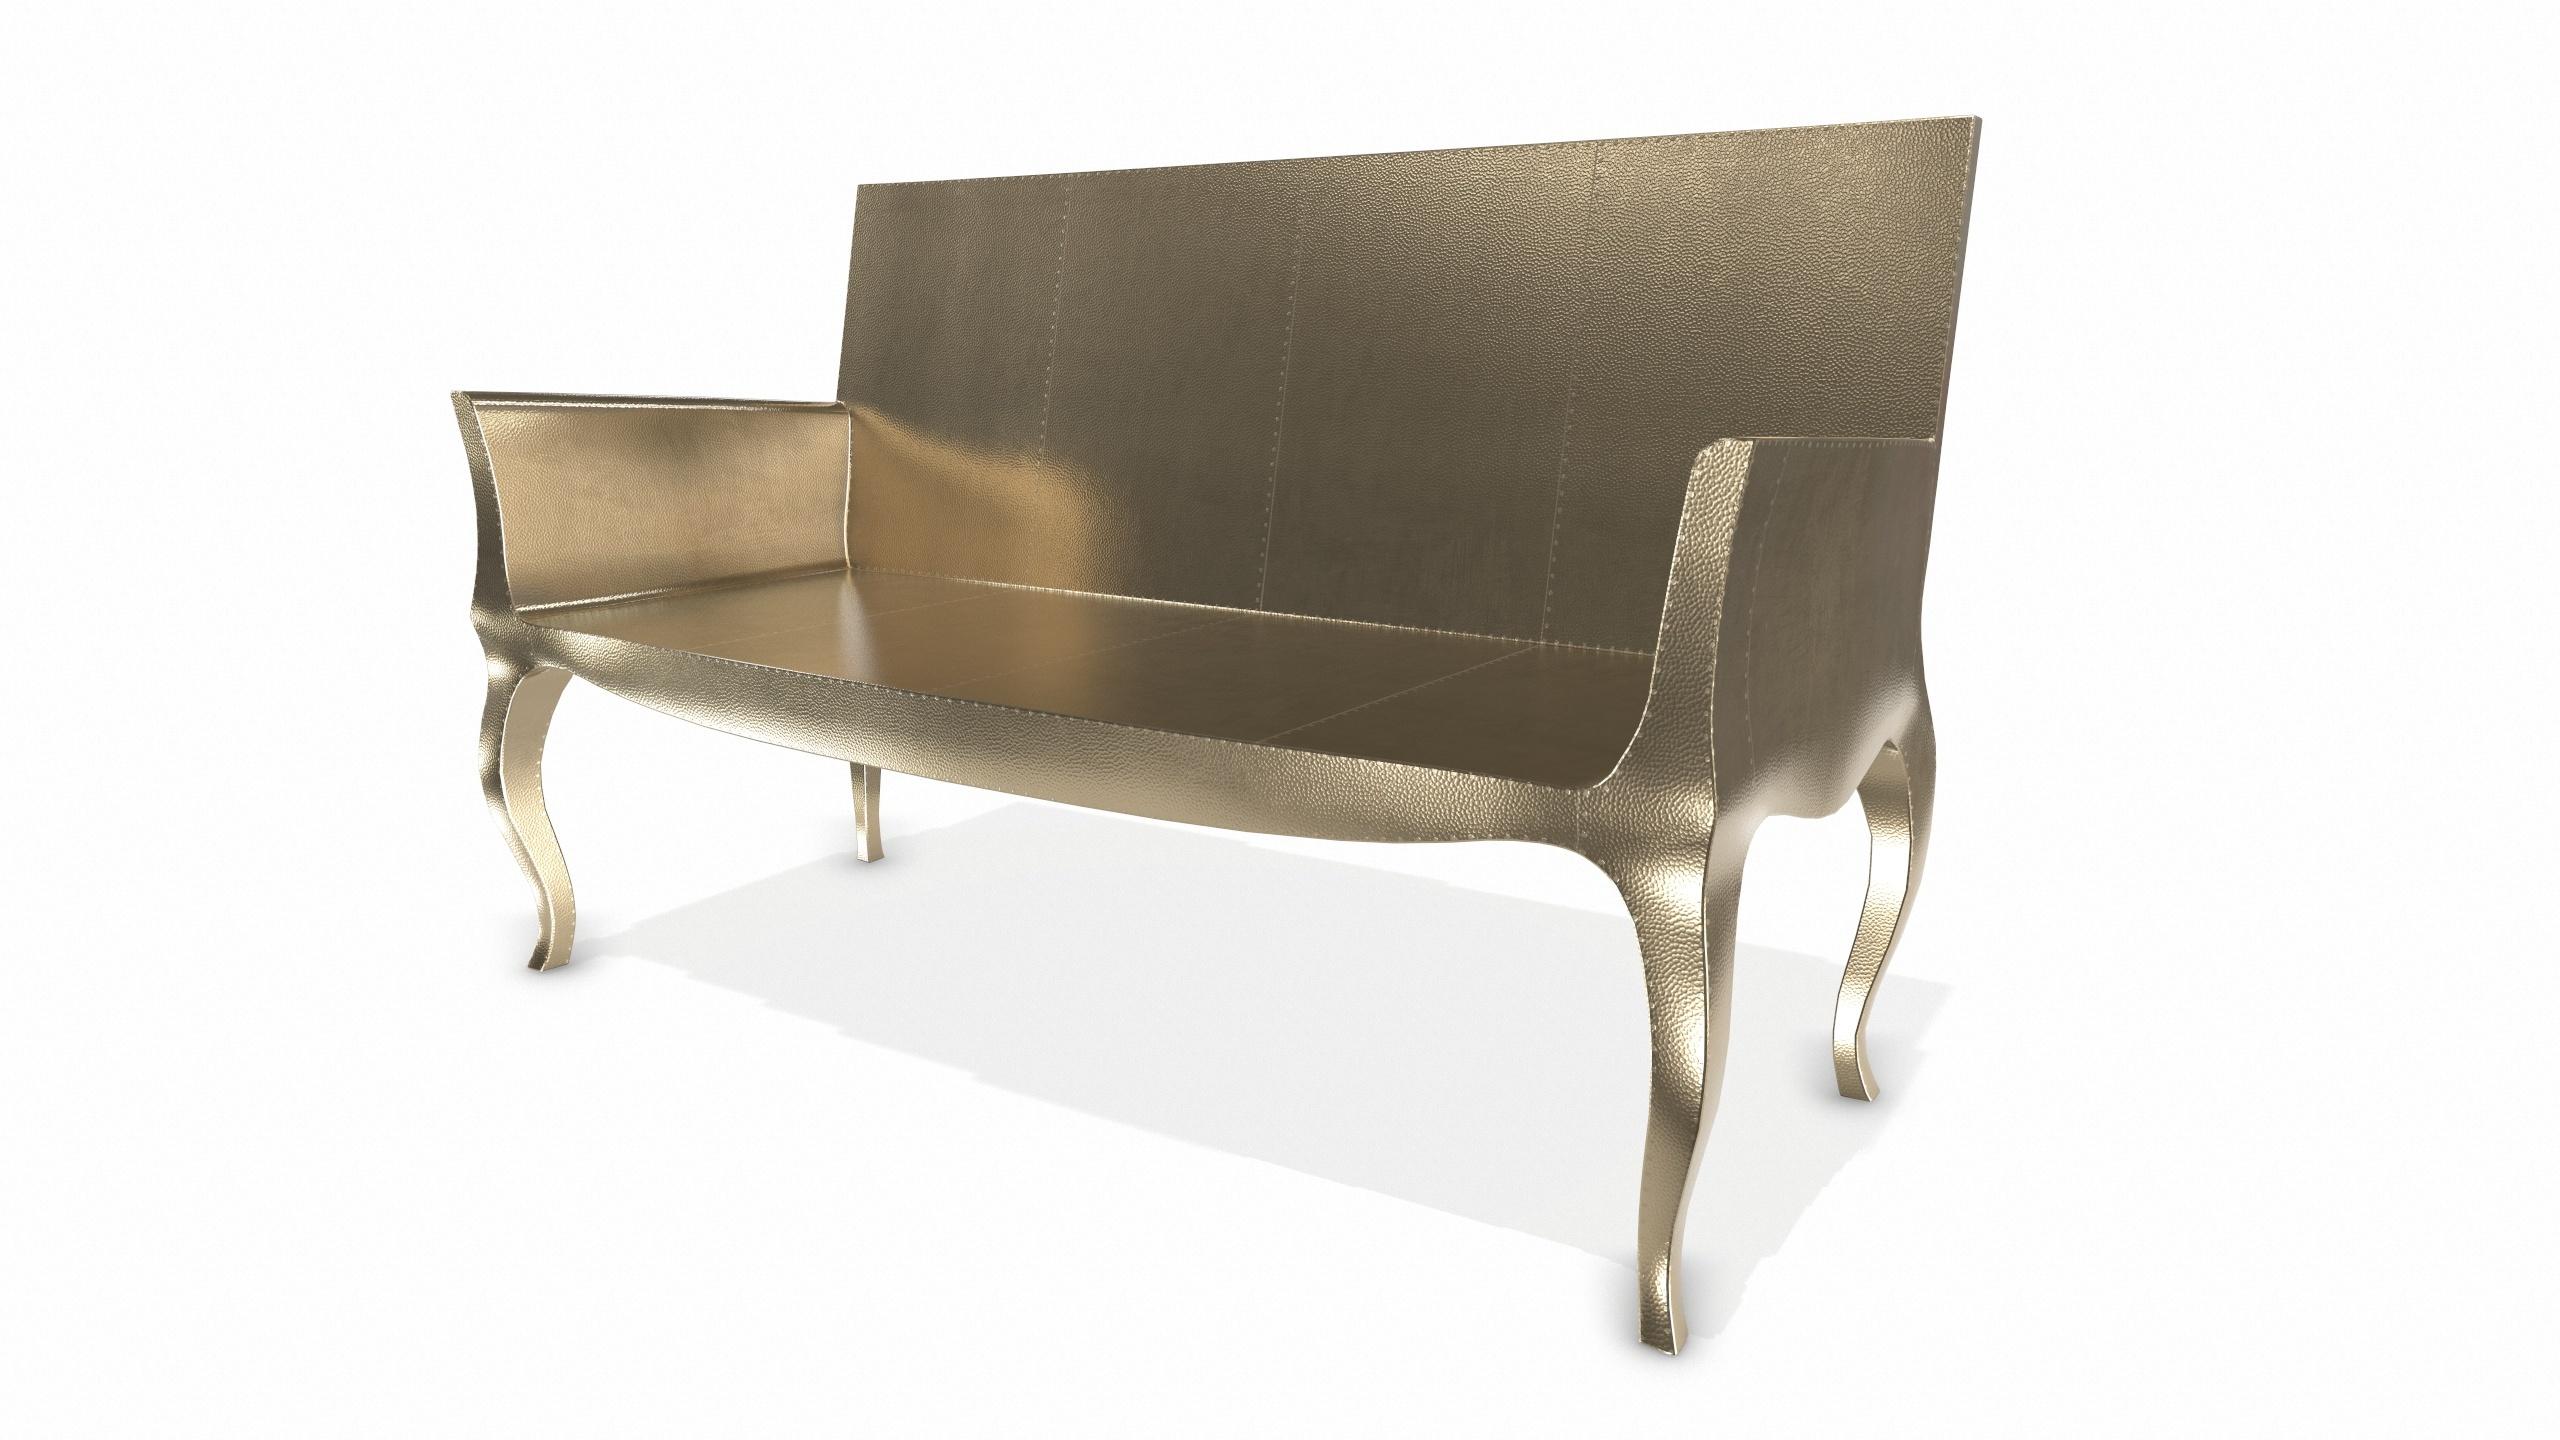 American Louise Settee Art Deco Settees in Mid. Hammered Brass by Paul Mathieu For Sale